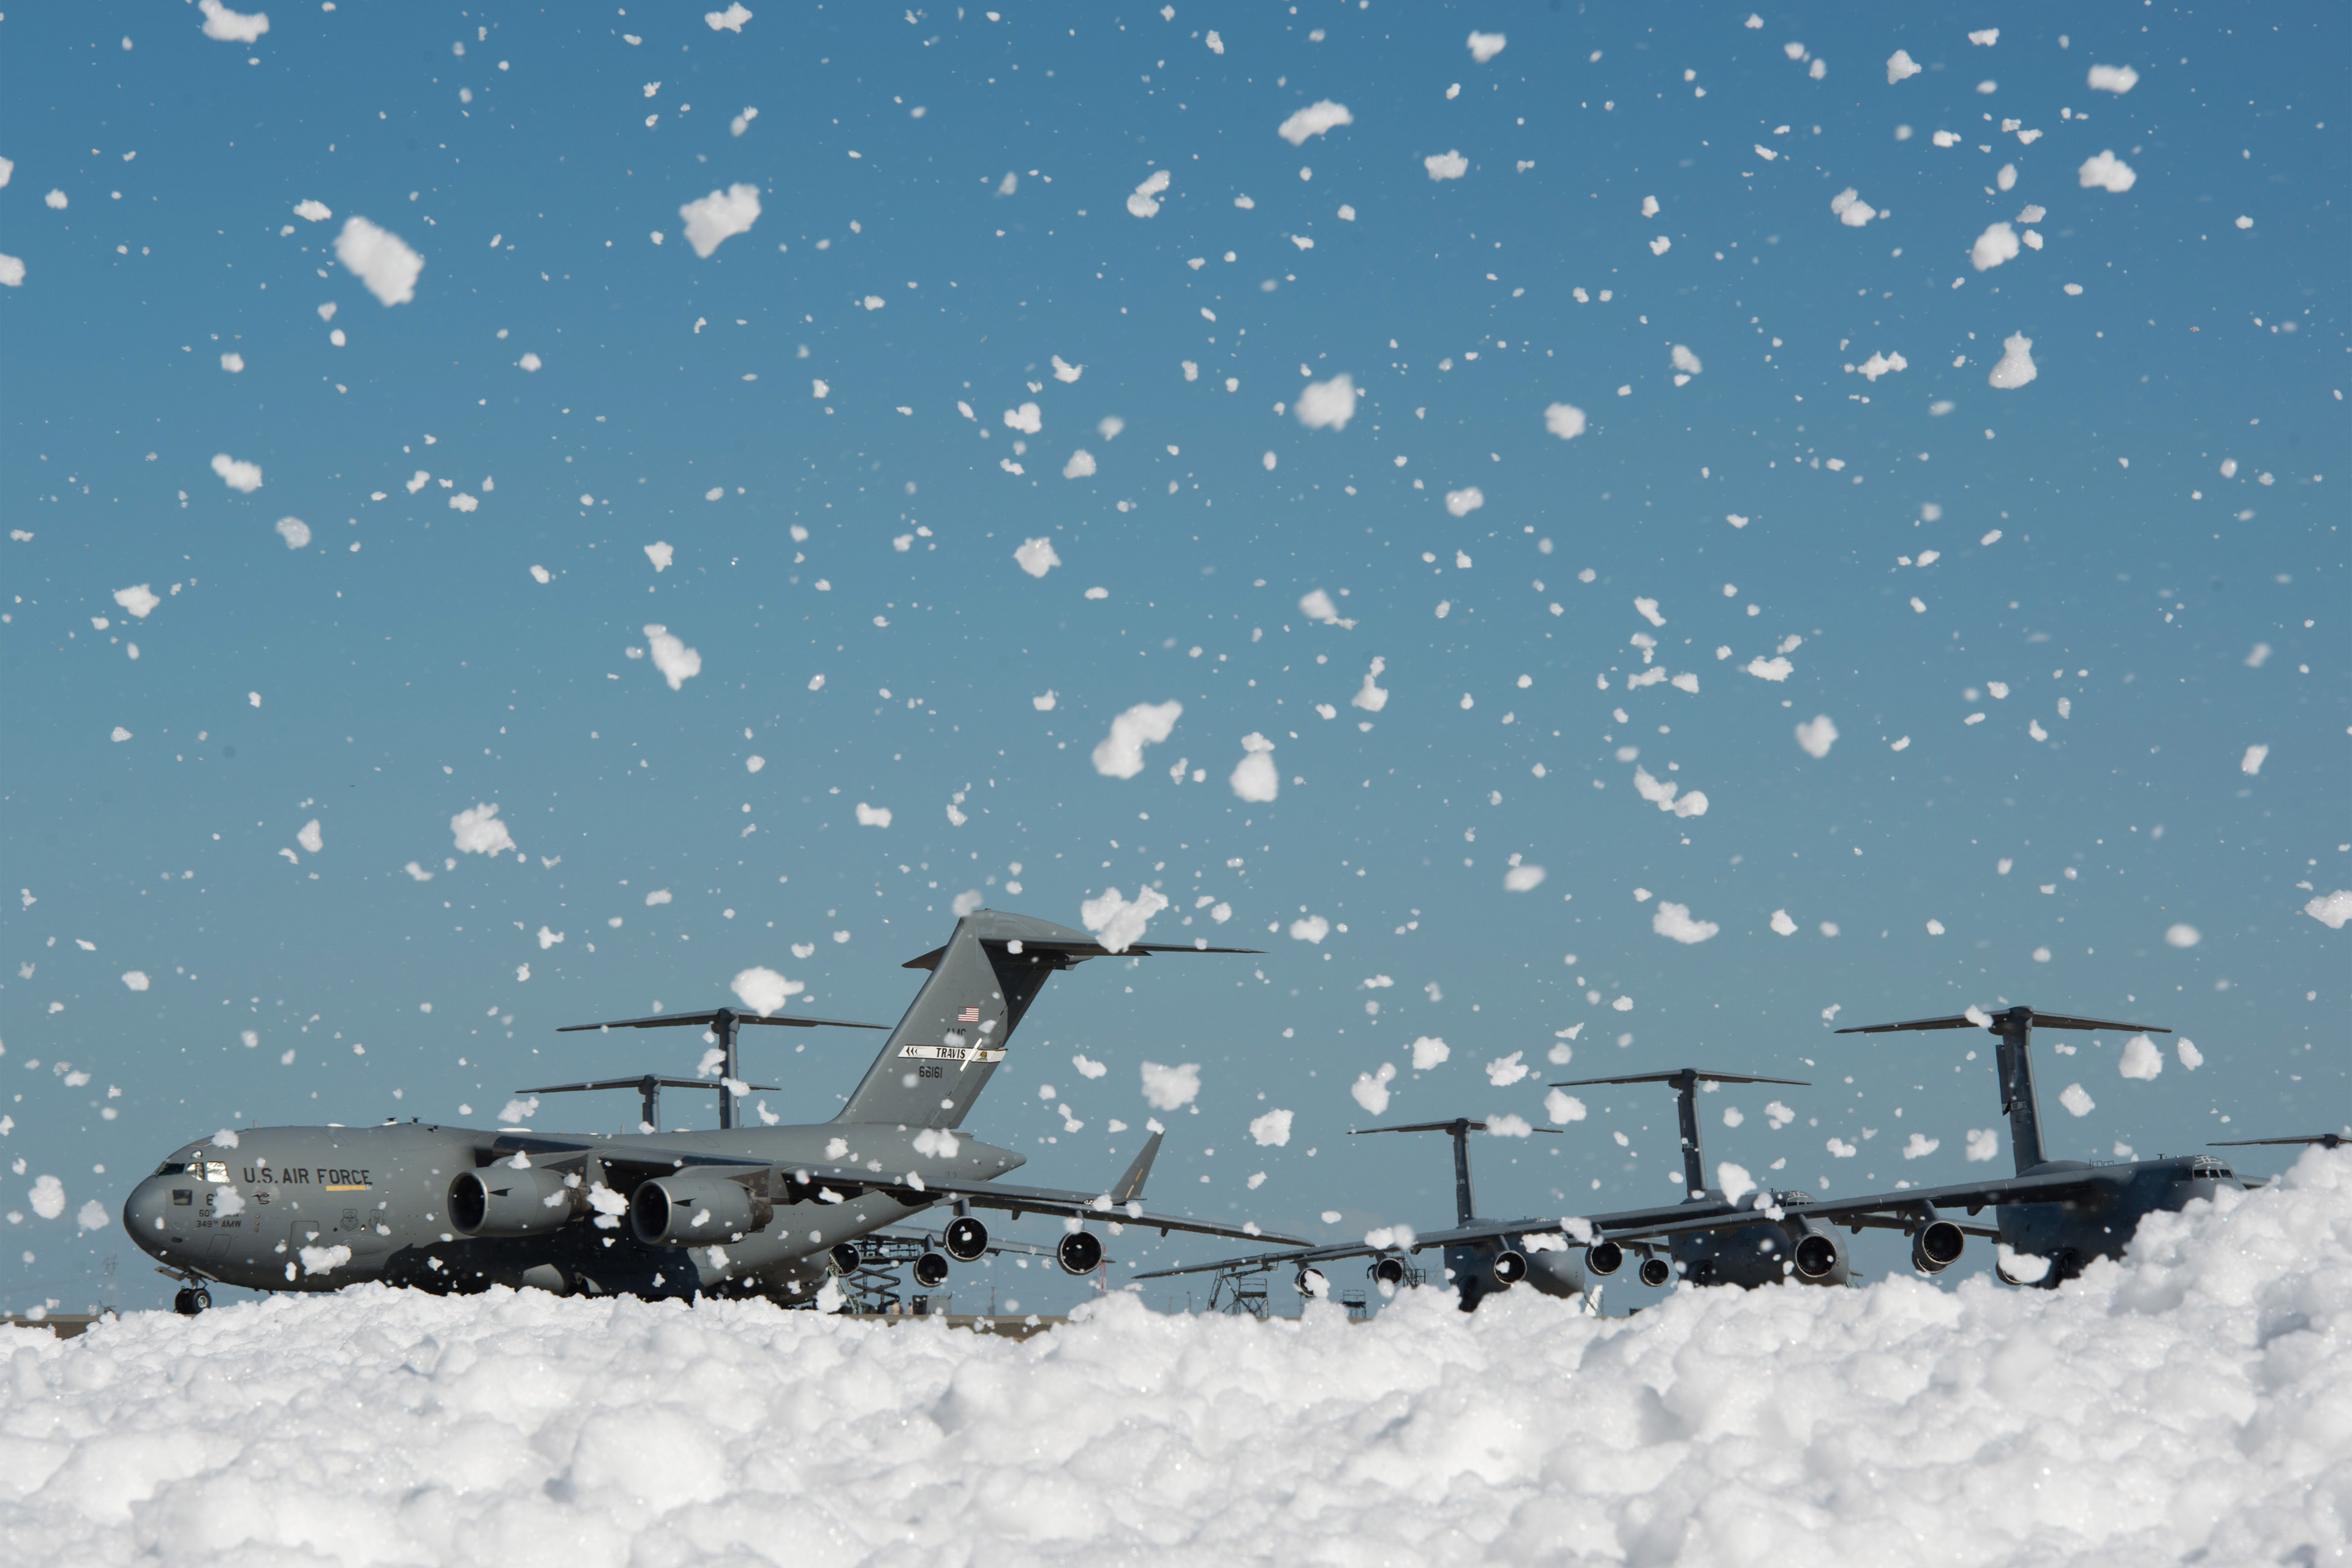 A photo of foam covering Travis Air Force Base's flight line. Military aircraft can be seen in the background.